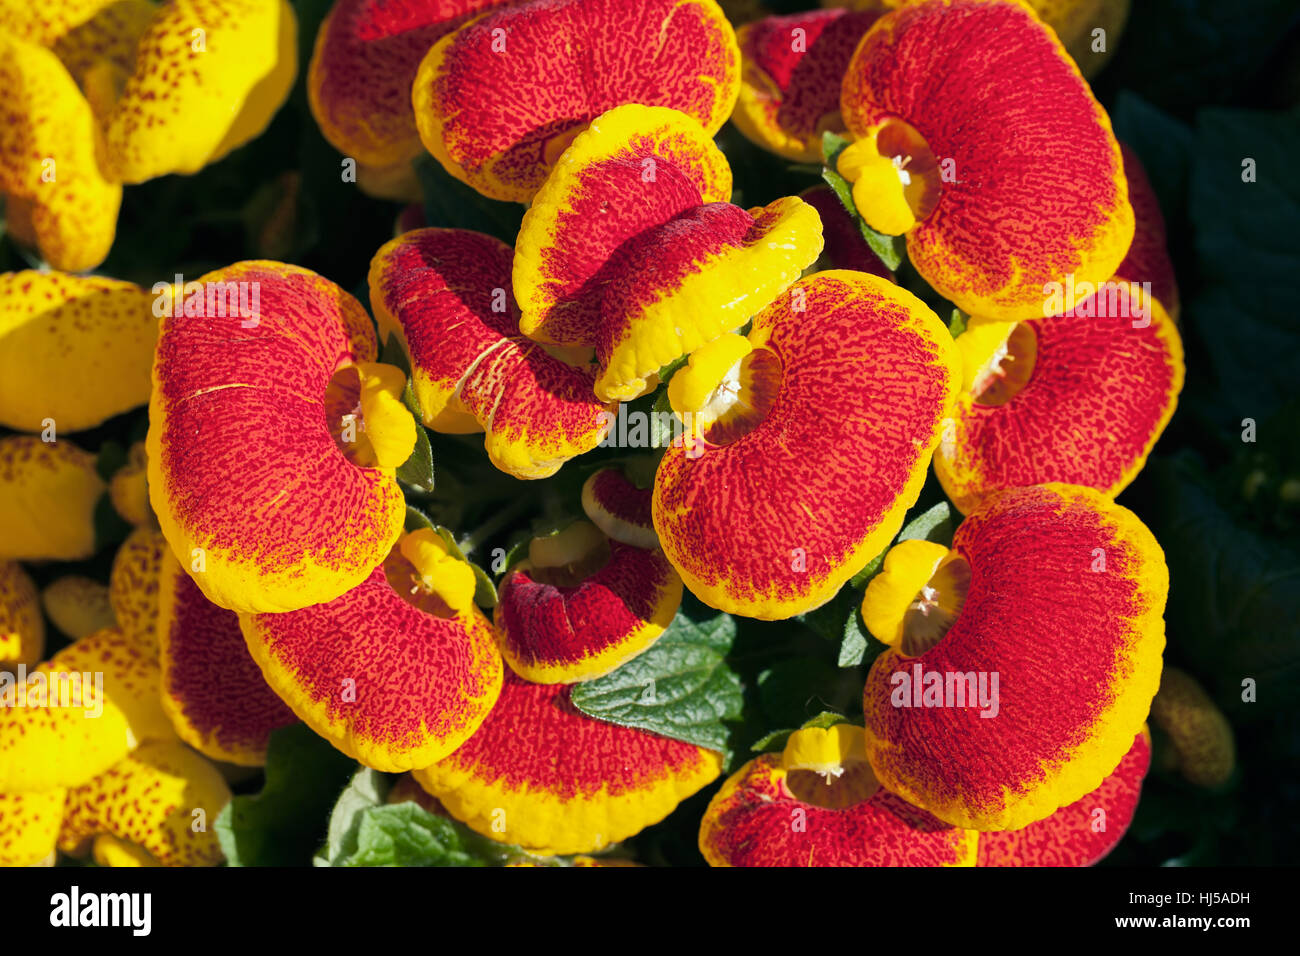 a lot of flowers of red house plant calceolaria, note shallow depth of field Stock Photo